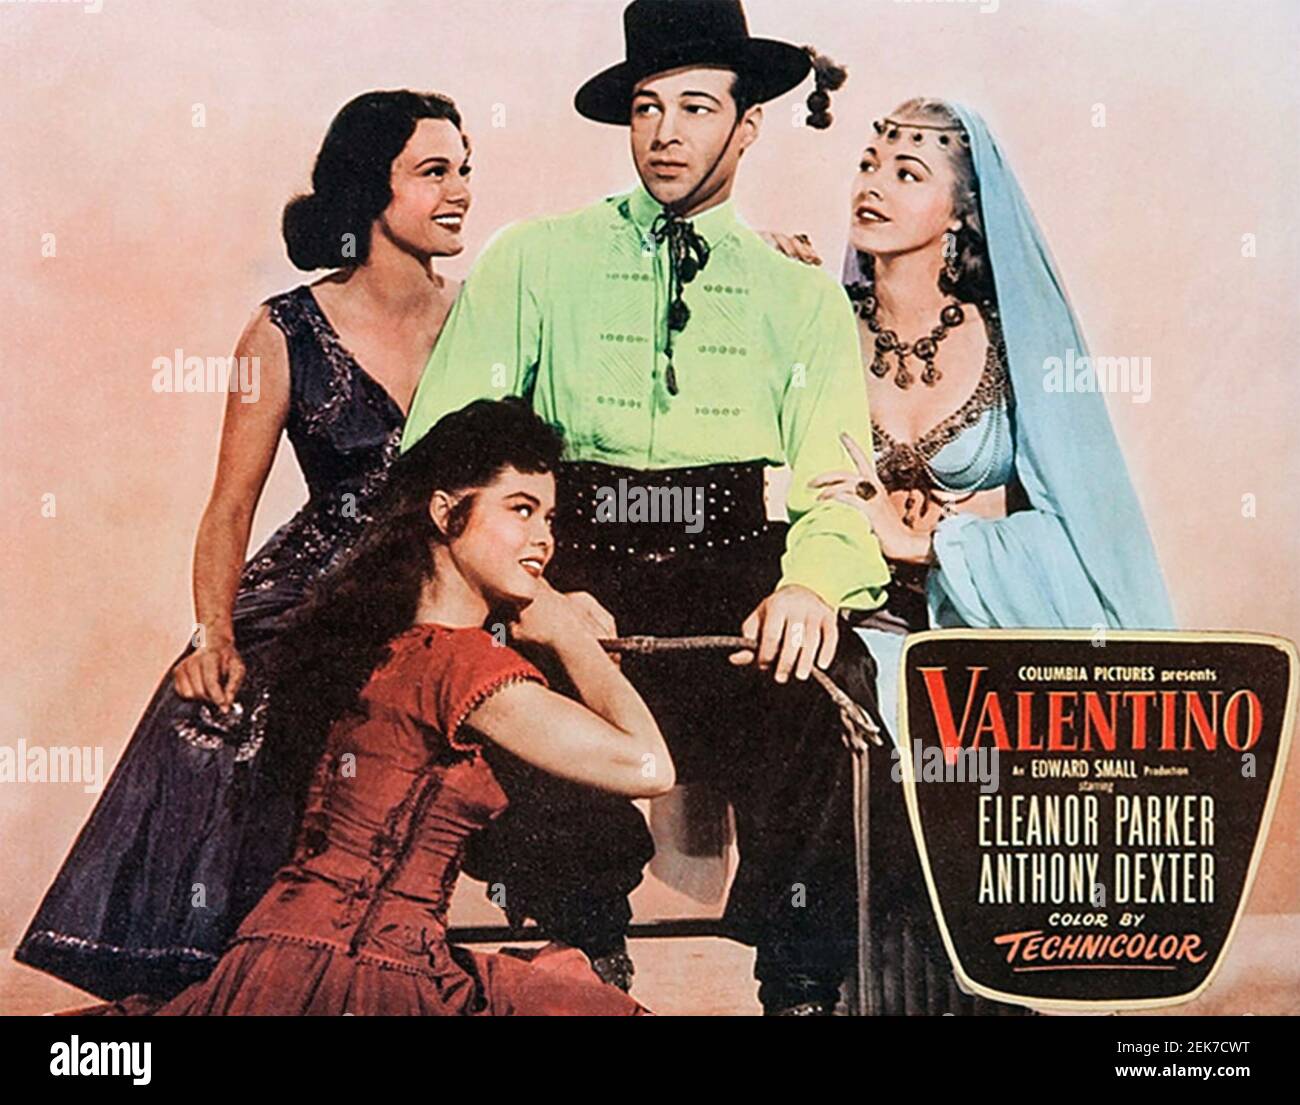 VALENTINO 1951 Columbia Pictures film with Anthony Dexter and Eleanor  Parker top left Stock Photo - Alamy